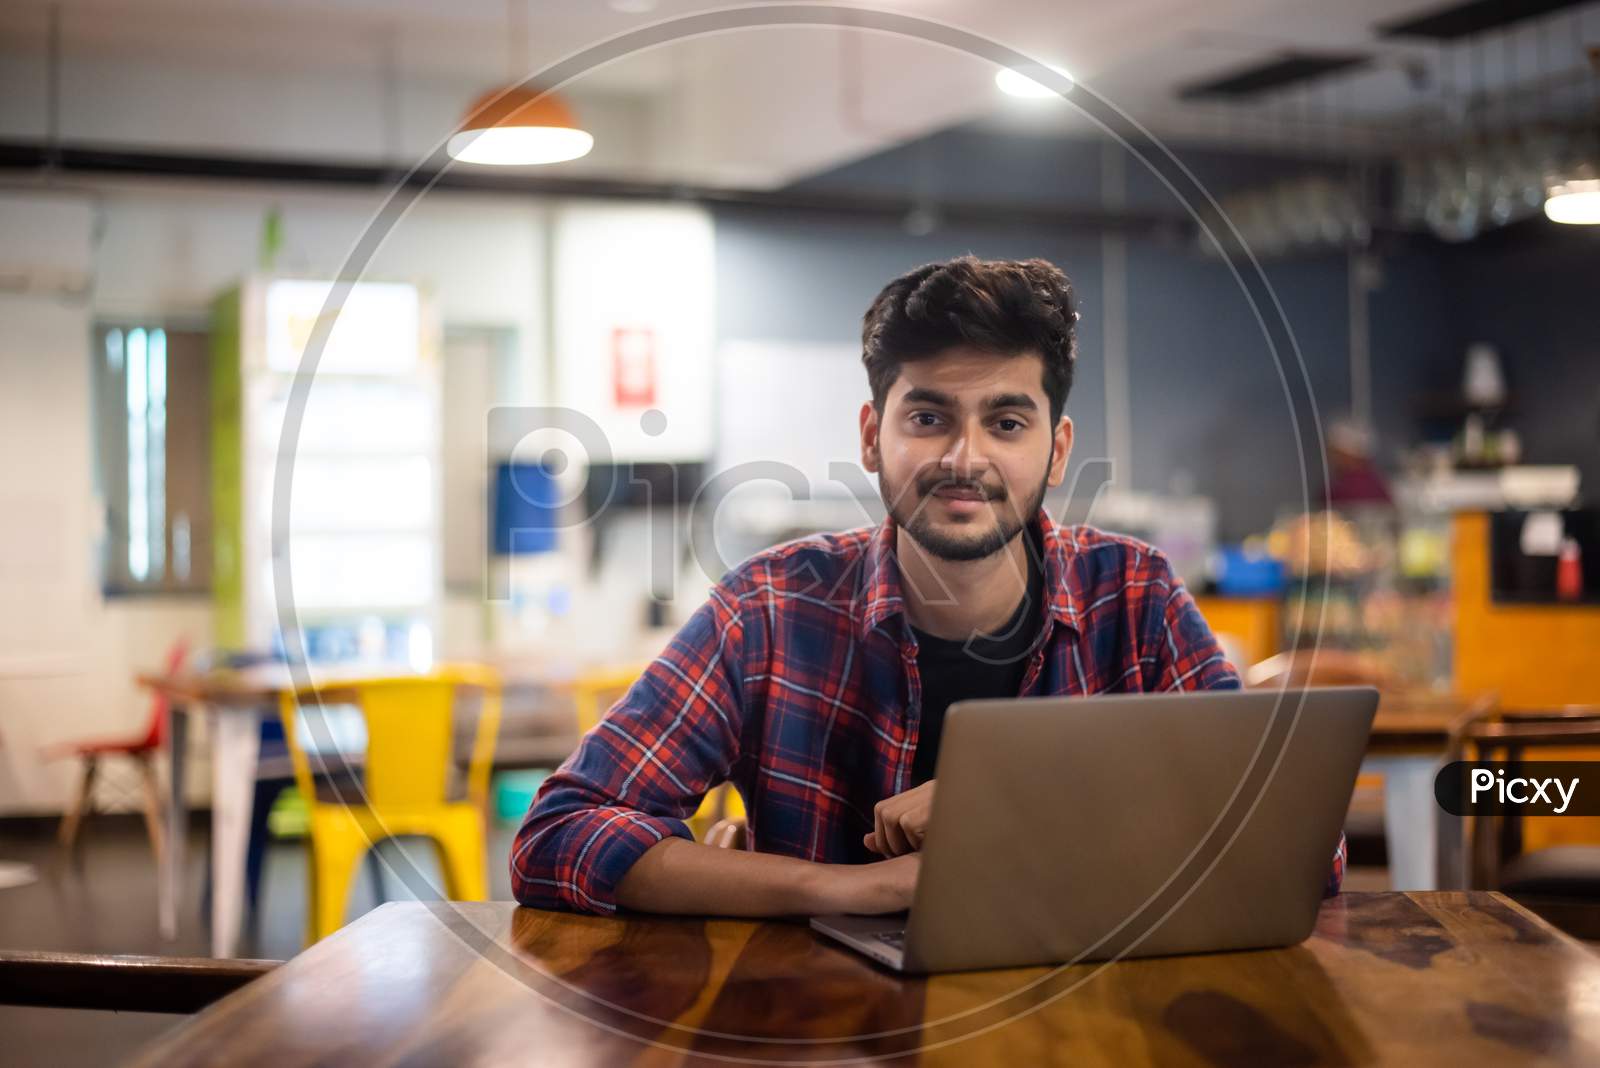 Smiling young Indian man working on a laptop in office